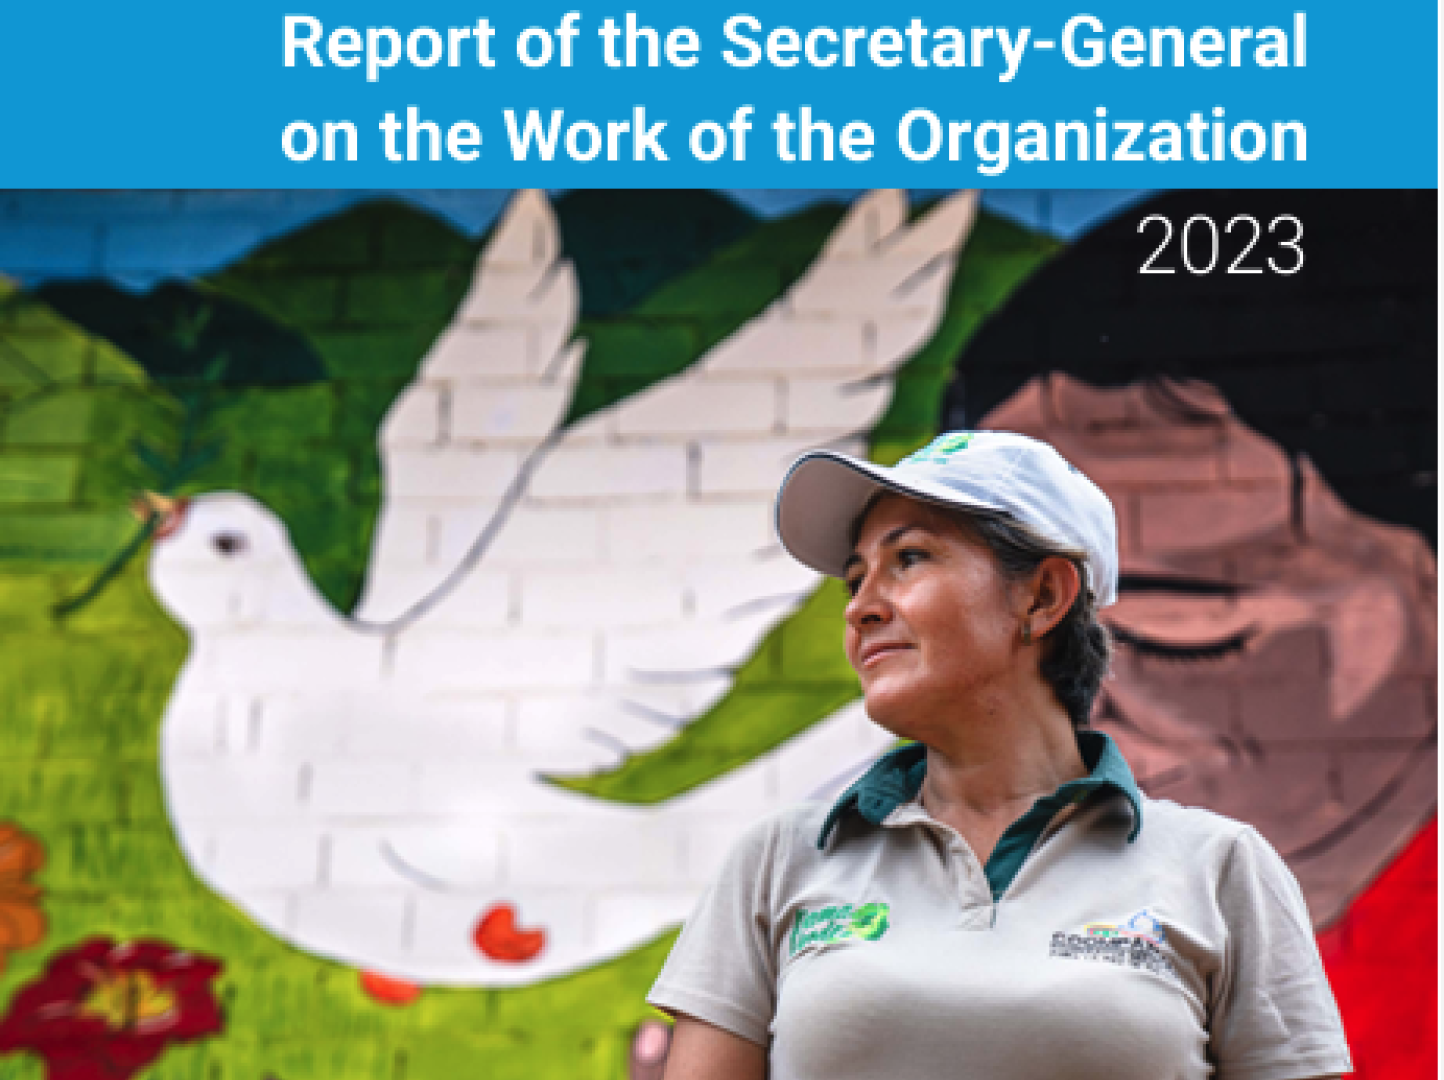 Determined: Report of the Secretary-General on the Work of the Organization 2023